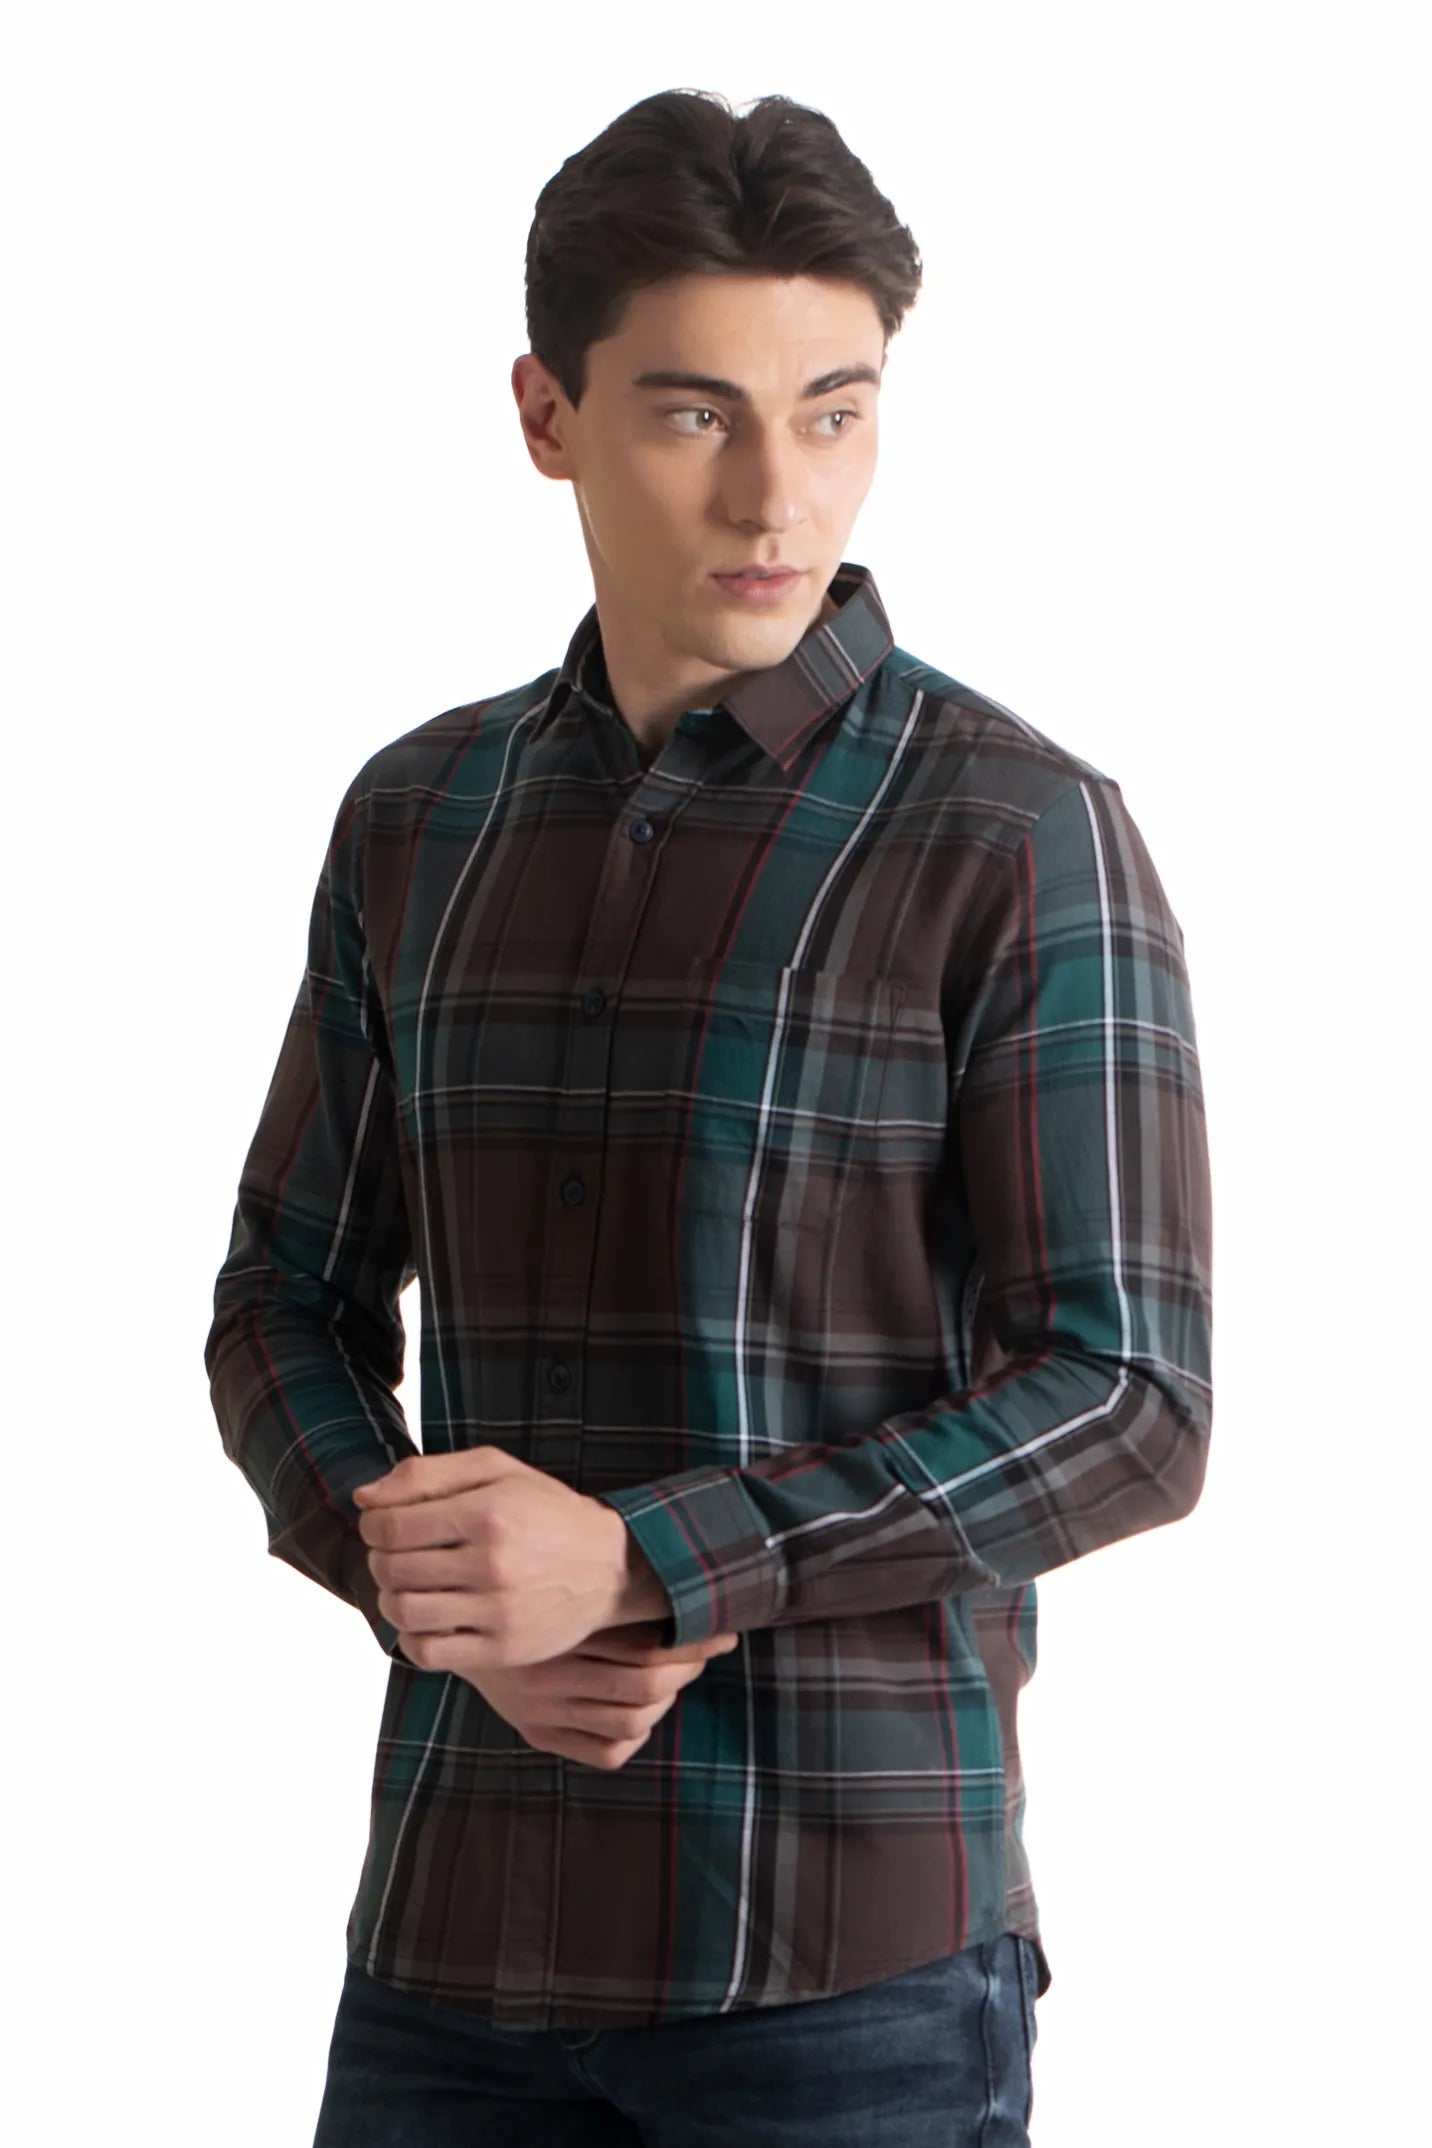 Buy Flannel Brushed Twill Zipper Shirt Online.